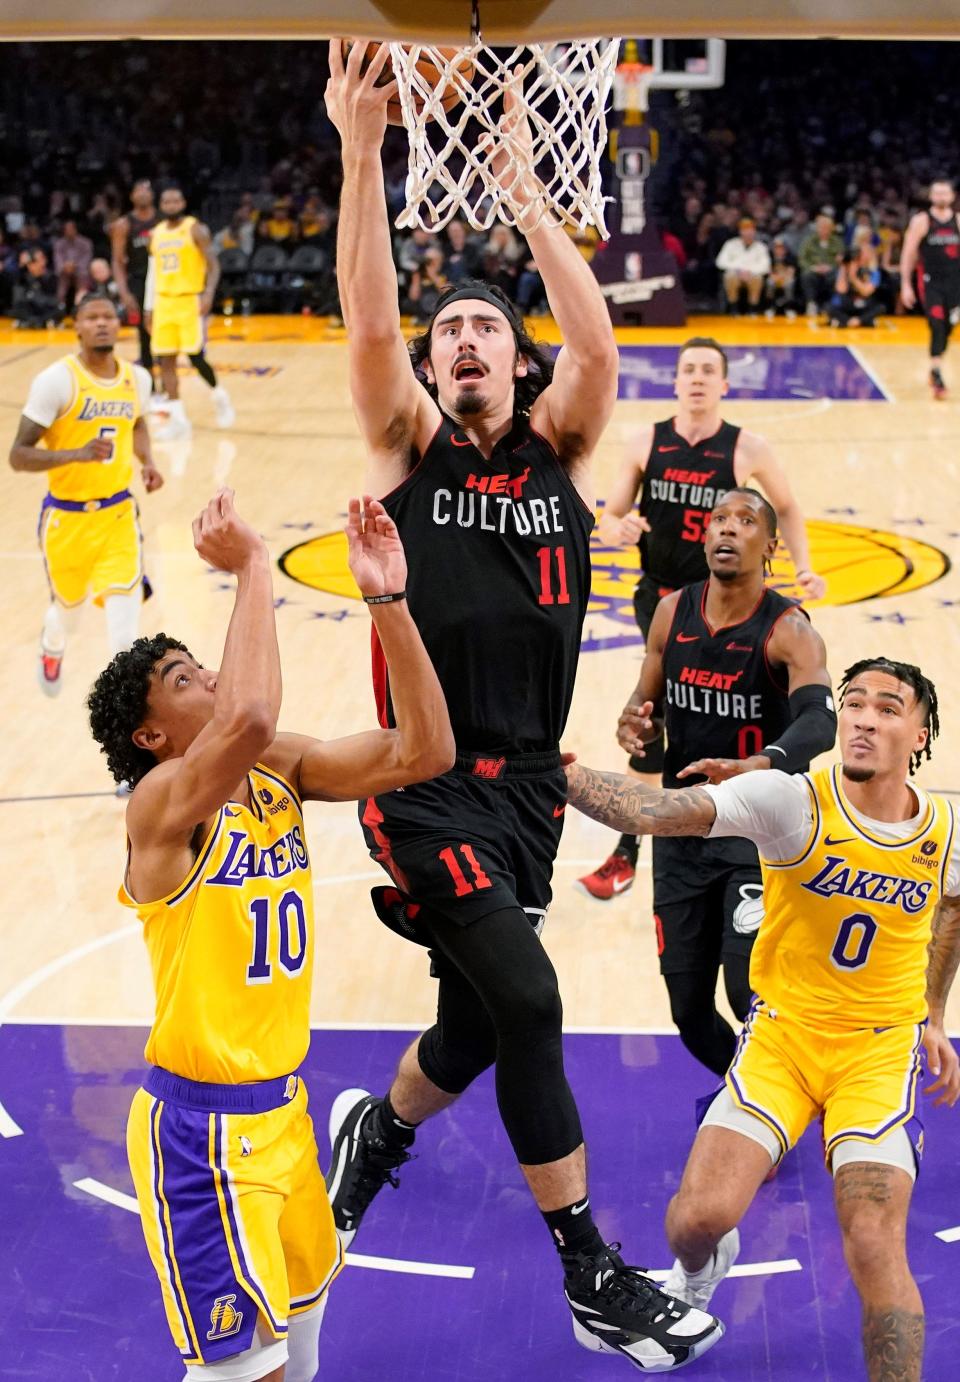 The Heat's Jaime Jaquez Jr. splits the defense of the Lakers' Max Christie (left) and Jalen Hood-Schifino to score a basket during Miami's 110-96 win in Los Angeles on Wednesday night. The Camarillo High graduate scored 16 points and also dished out eight assists.